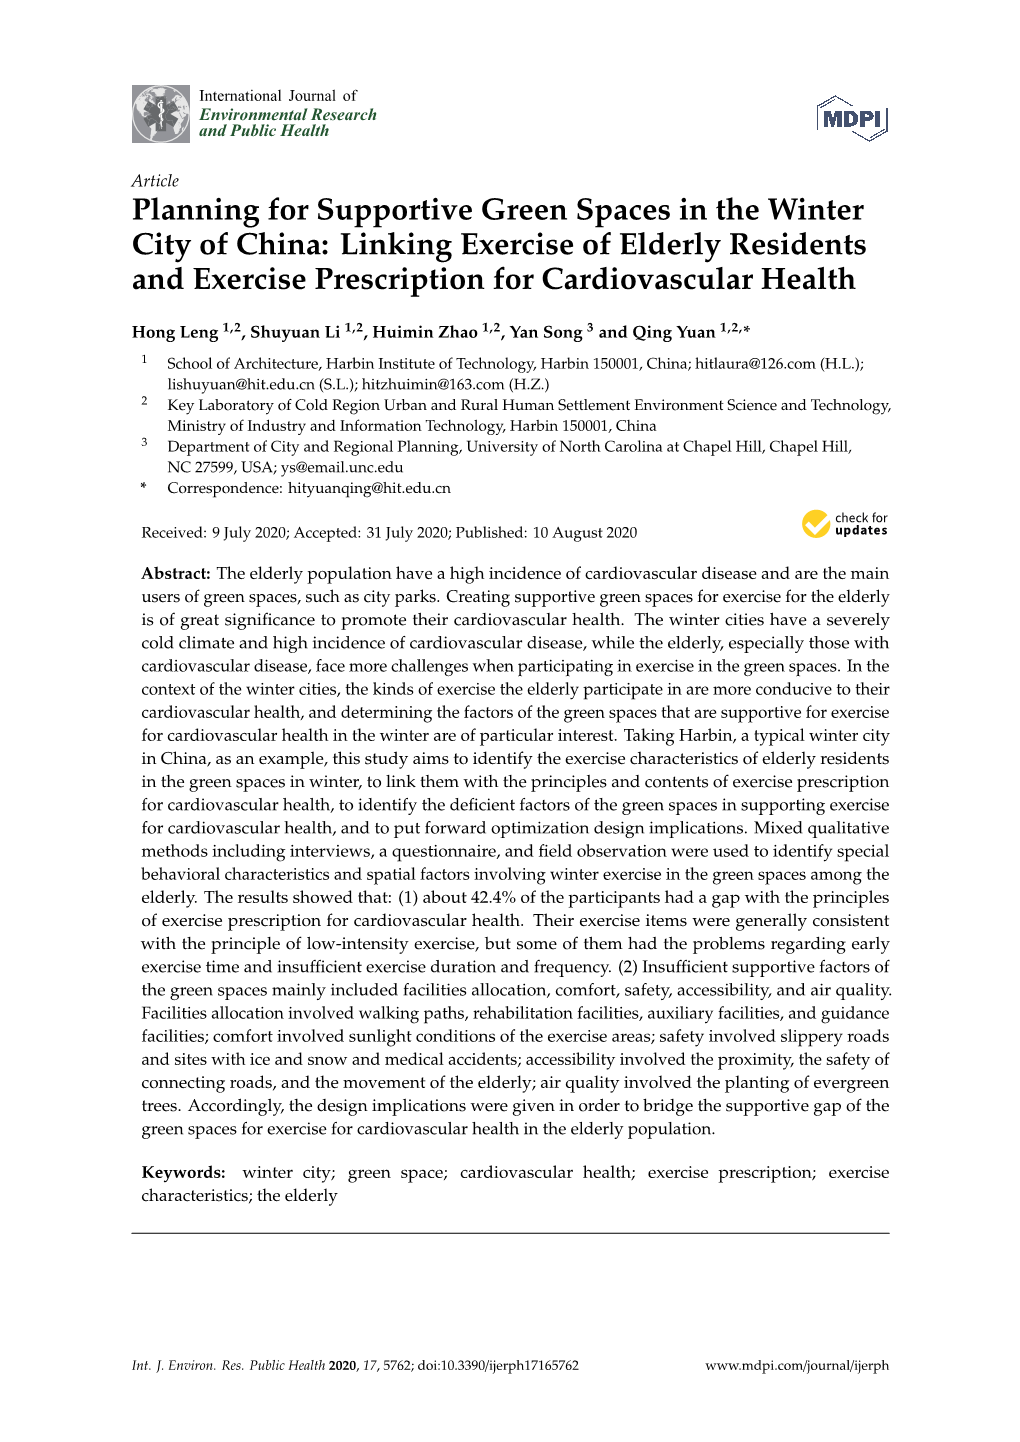 Planning for Supportive Green Spaces in the Winter City of China: Linking Exercise of Elderly Residents and Exercise Prescription for Cardiovascular Health